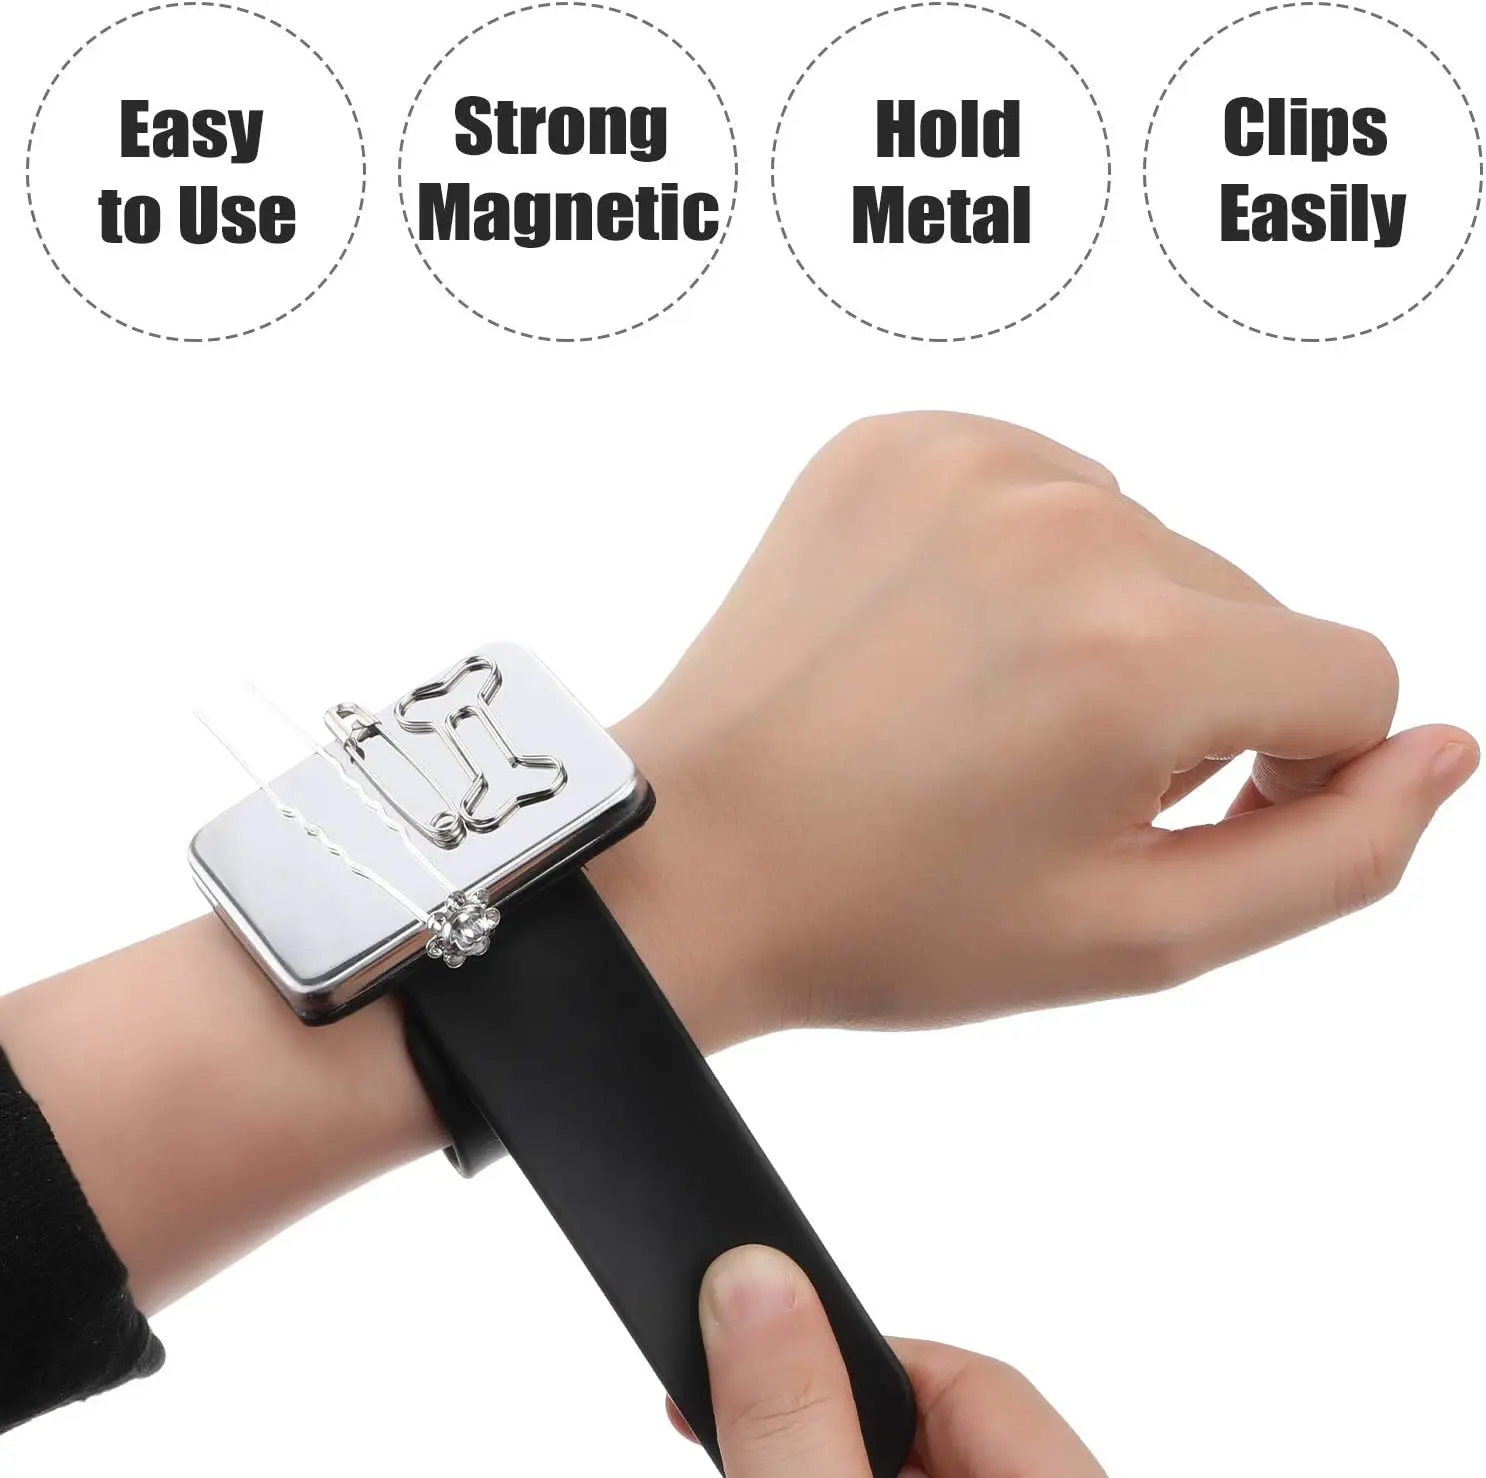 Professional Magnetic Bracelet Wrist Band Strap Salon Hair Accessories Hair Clip Holder Barber Hairdressing Styling Tools for samsung galaxy watch4 active 40mm 44mm watch4 classic 42mm 46mm metal watch strap 5 beads 3 rows rhinestones decor watch wrist band replacement silver transparent